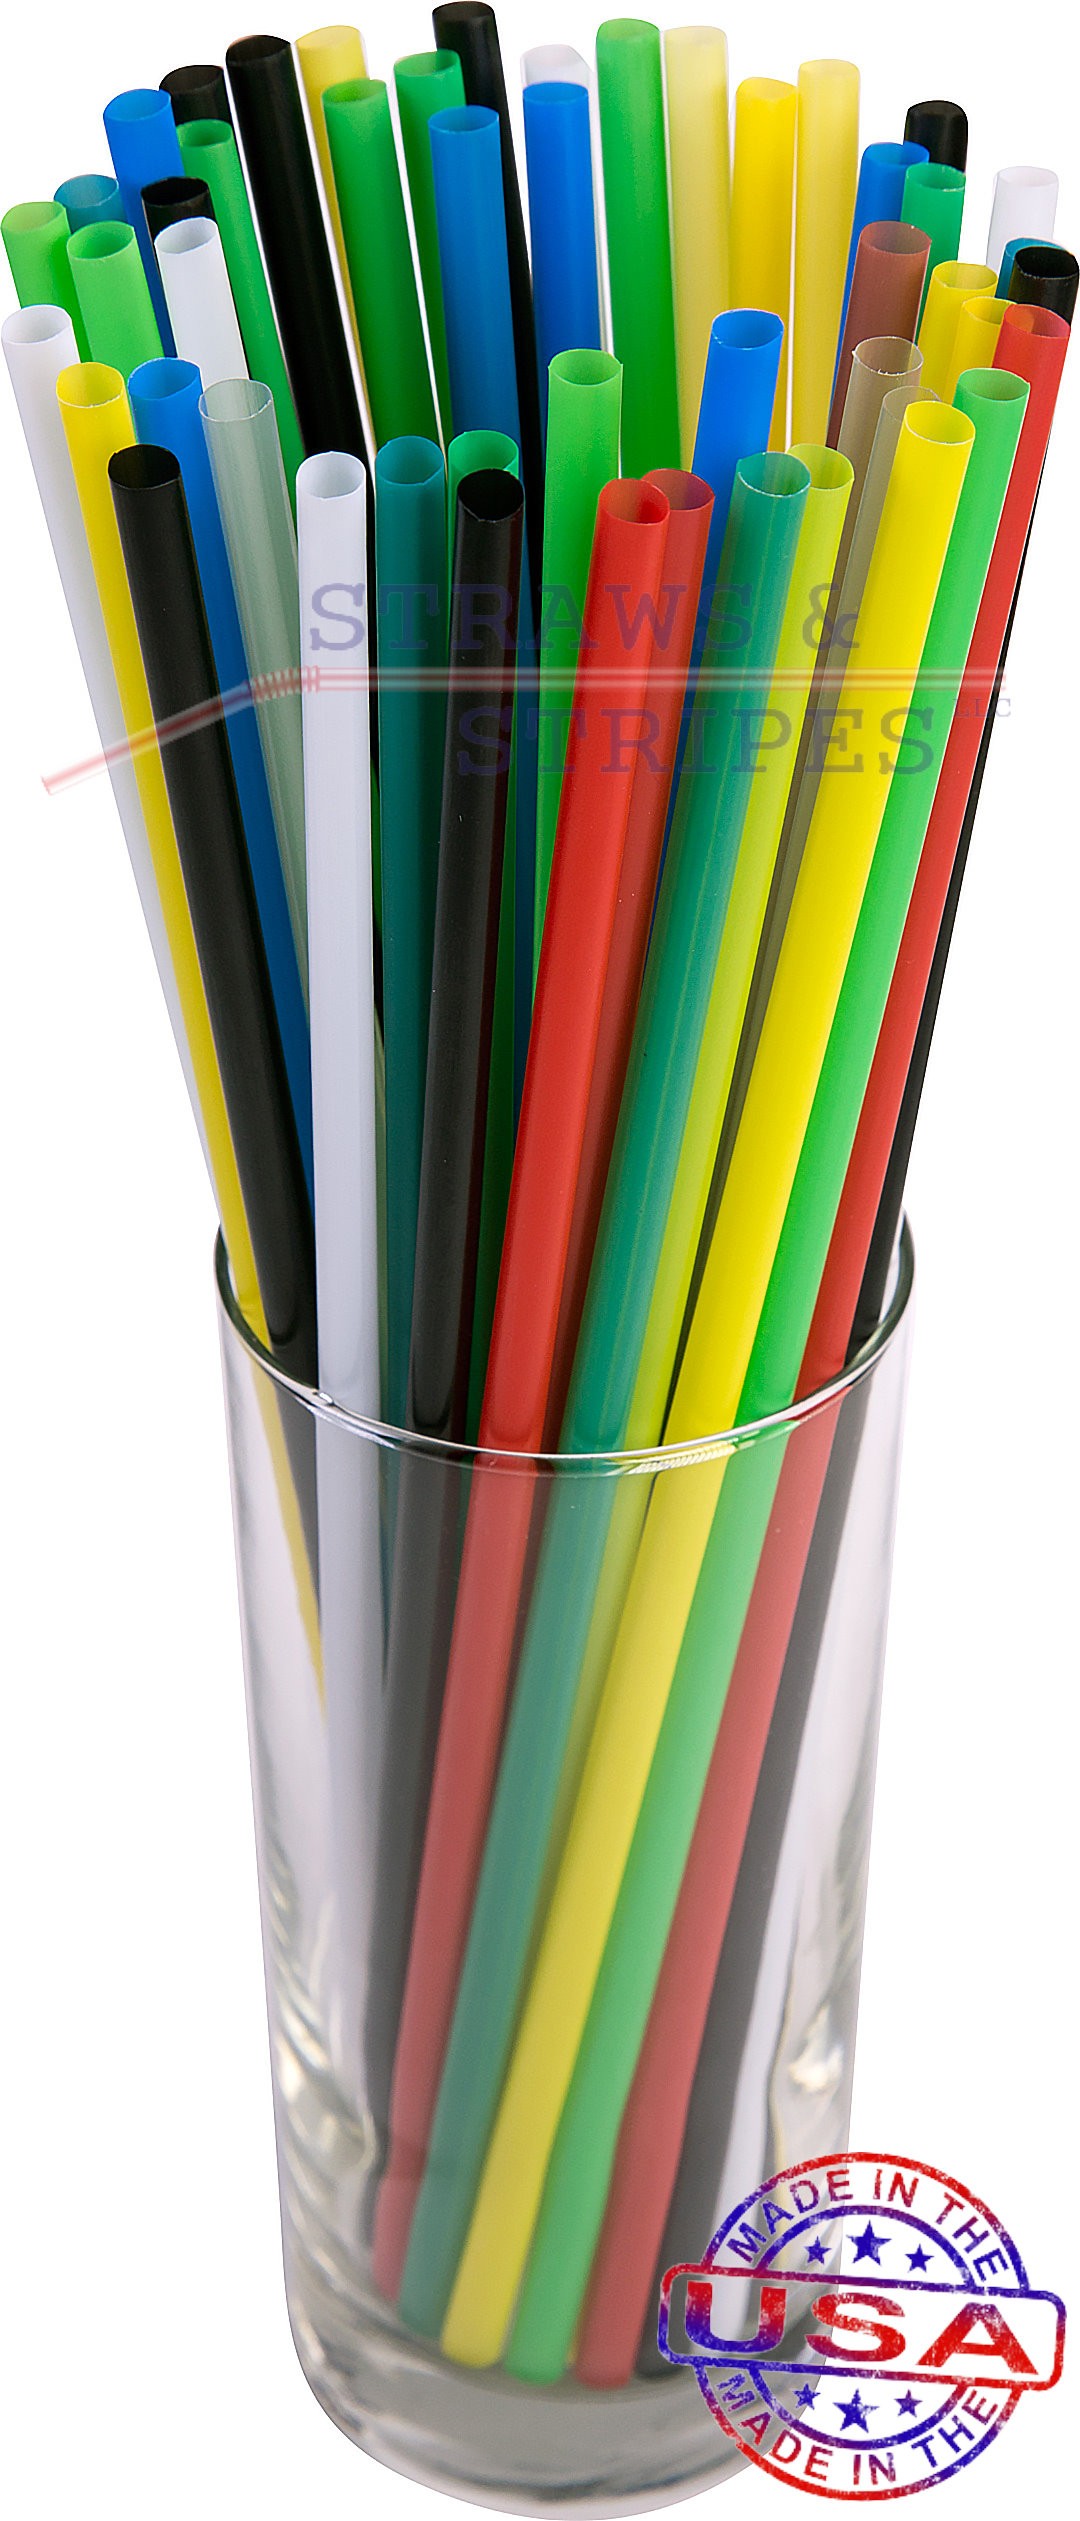 We are a drinking straw manufacture here in the USA (FLORIDA) JUMBO+ ...